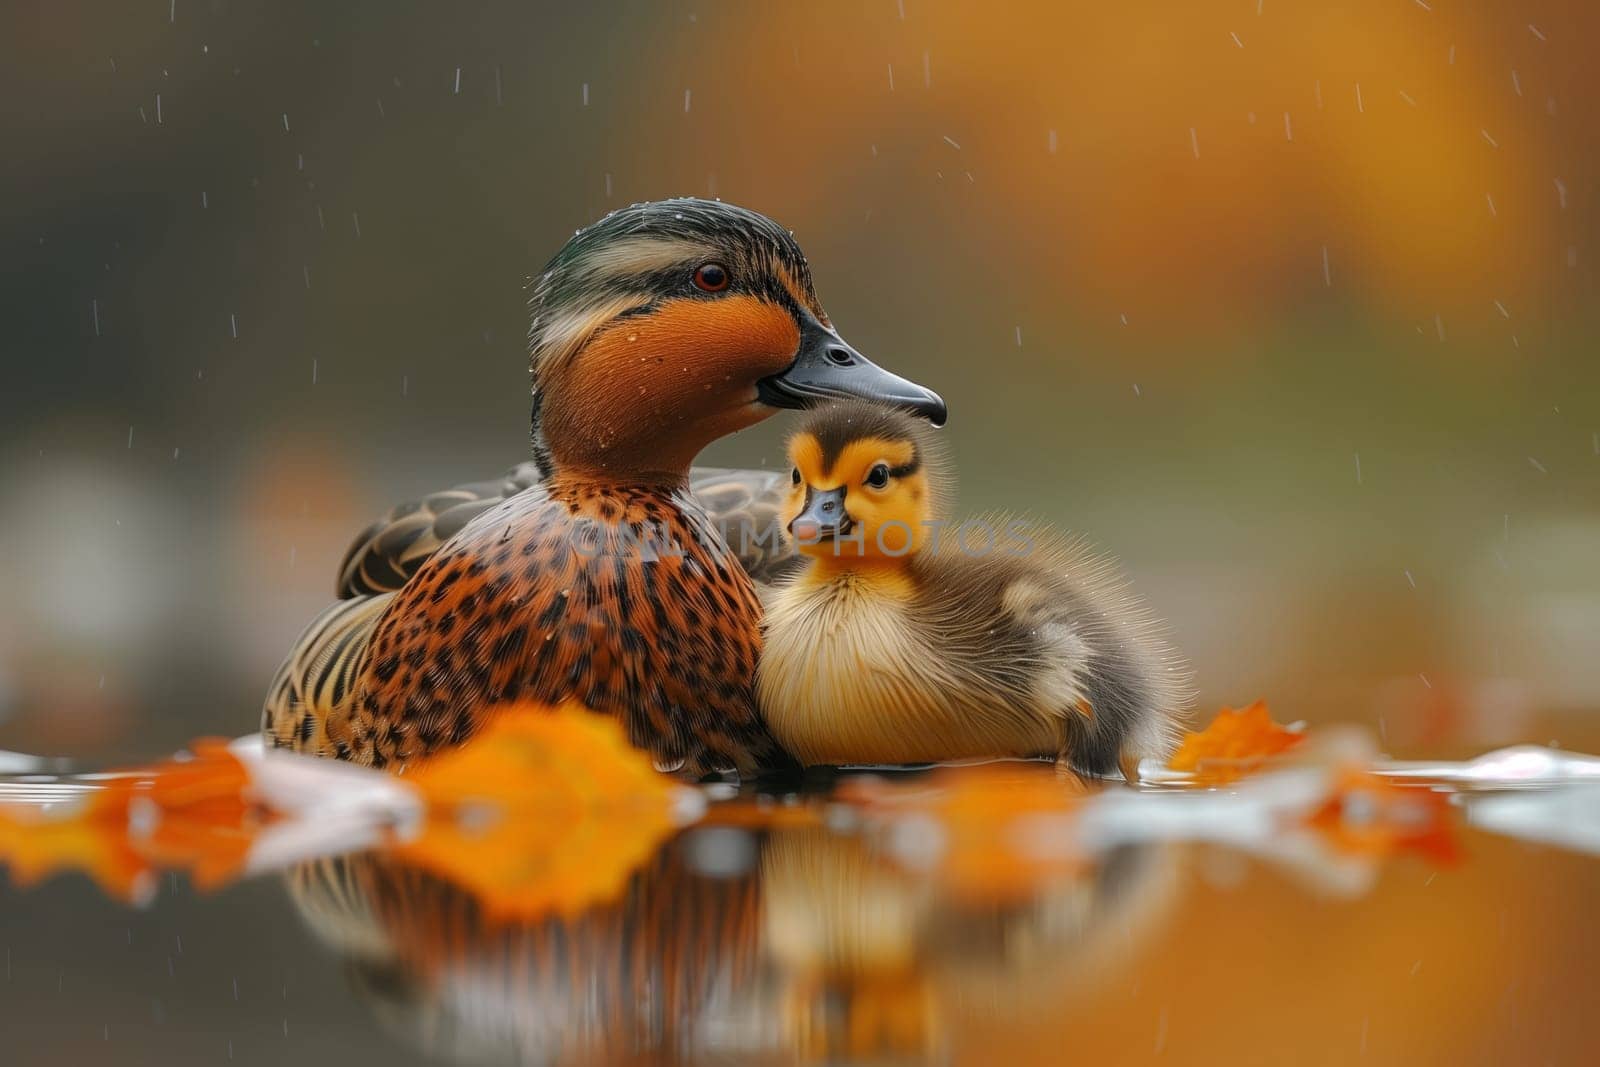 A pair of ducks, a mother and her duckling, glide gracefully through the liquid, their feathers glistening in the sunlight